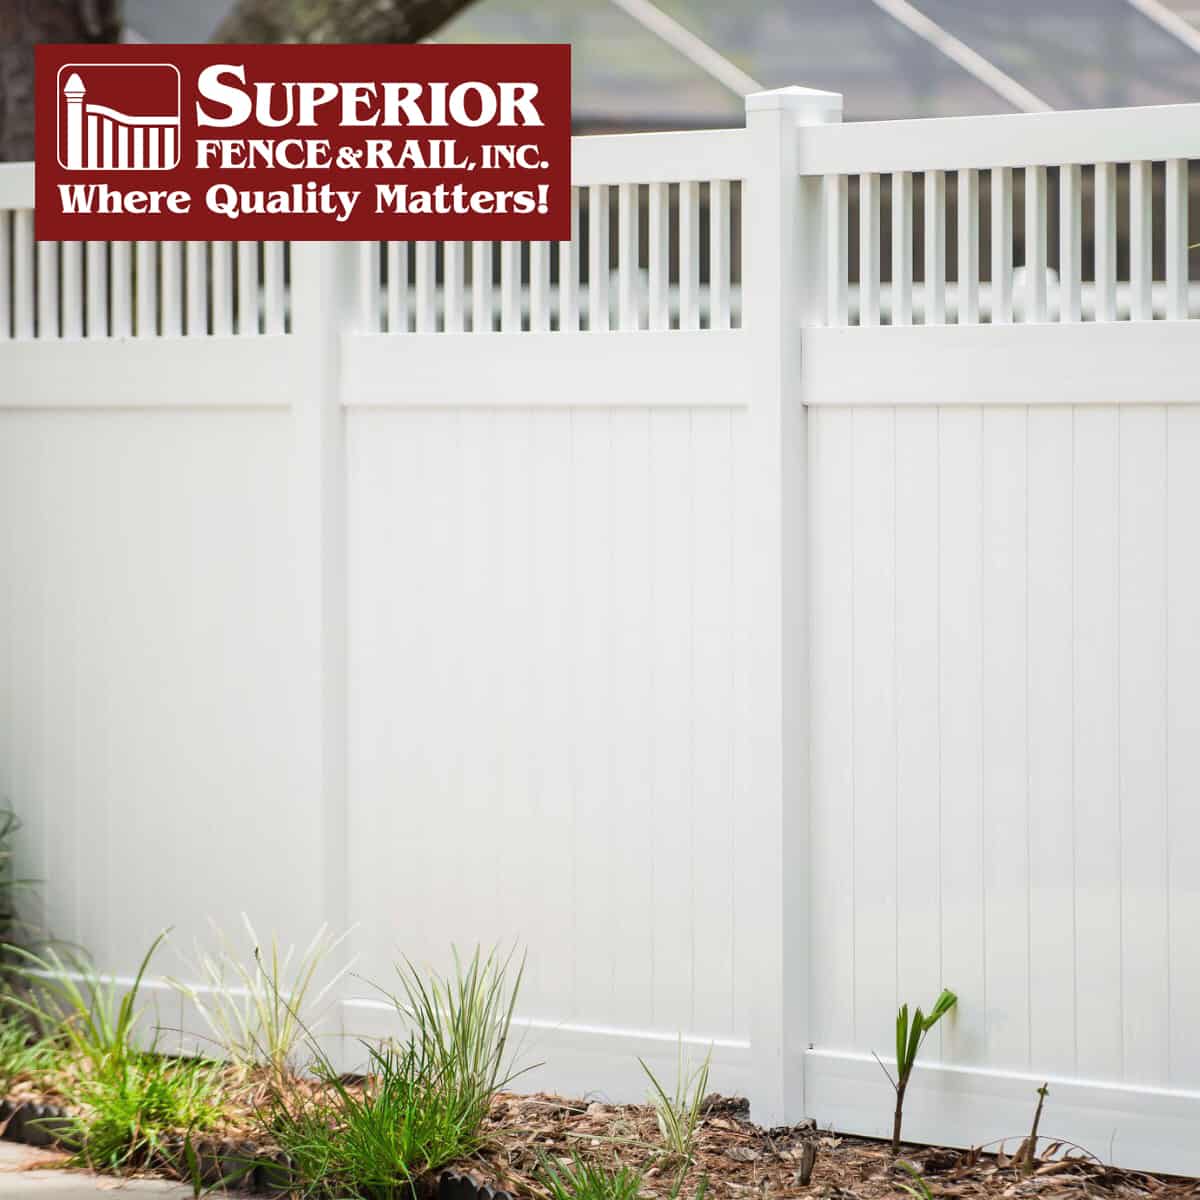 Hightstown Fence Company Contractor